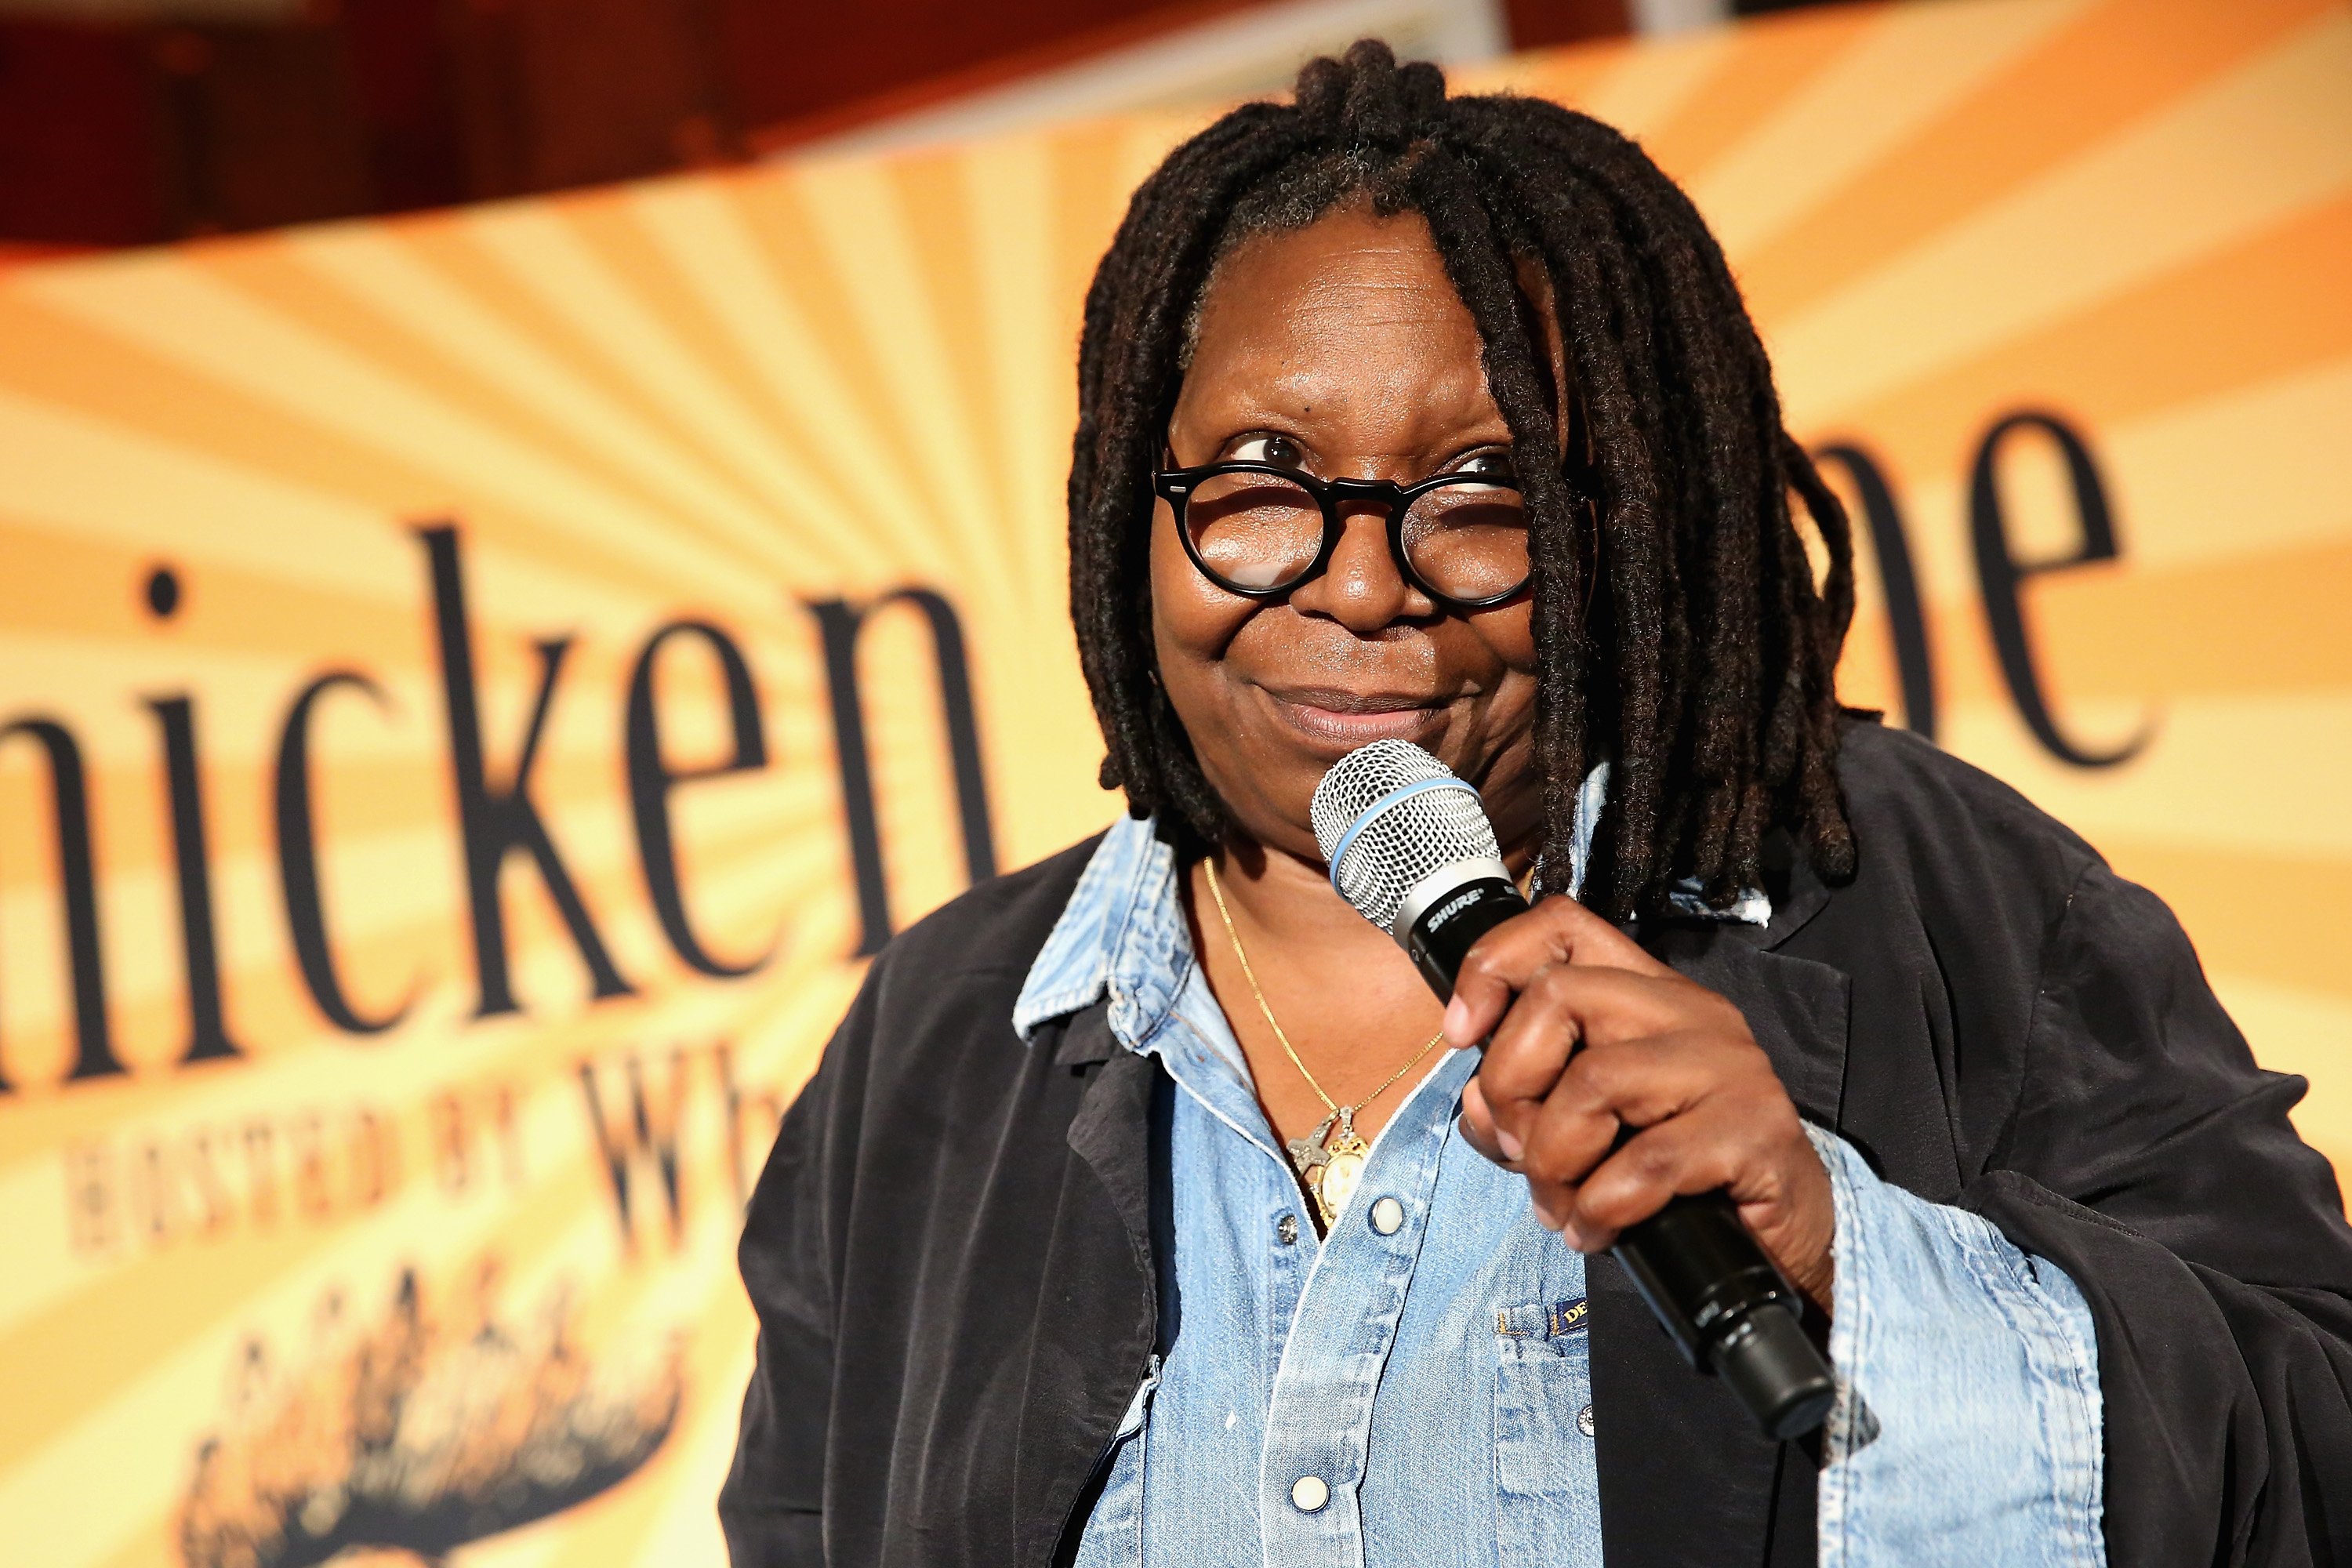 Whoopi Goldberg during Food Network & Cooking Channel New York City Wine & Food Festival presented by FOOD & WINE at The Loeb Boathouse on October 15, 2015 | Photo: GettyImages